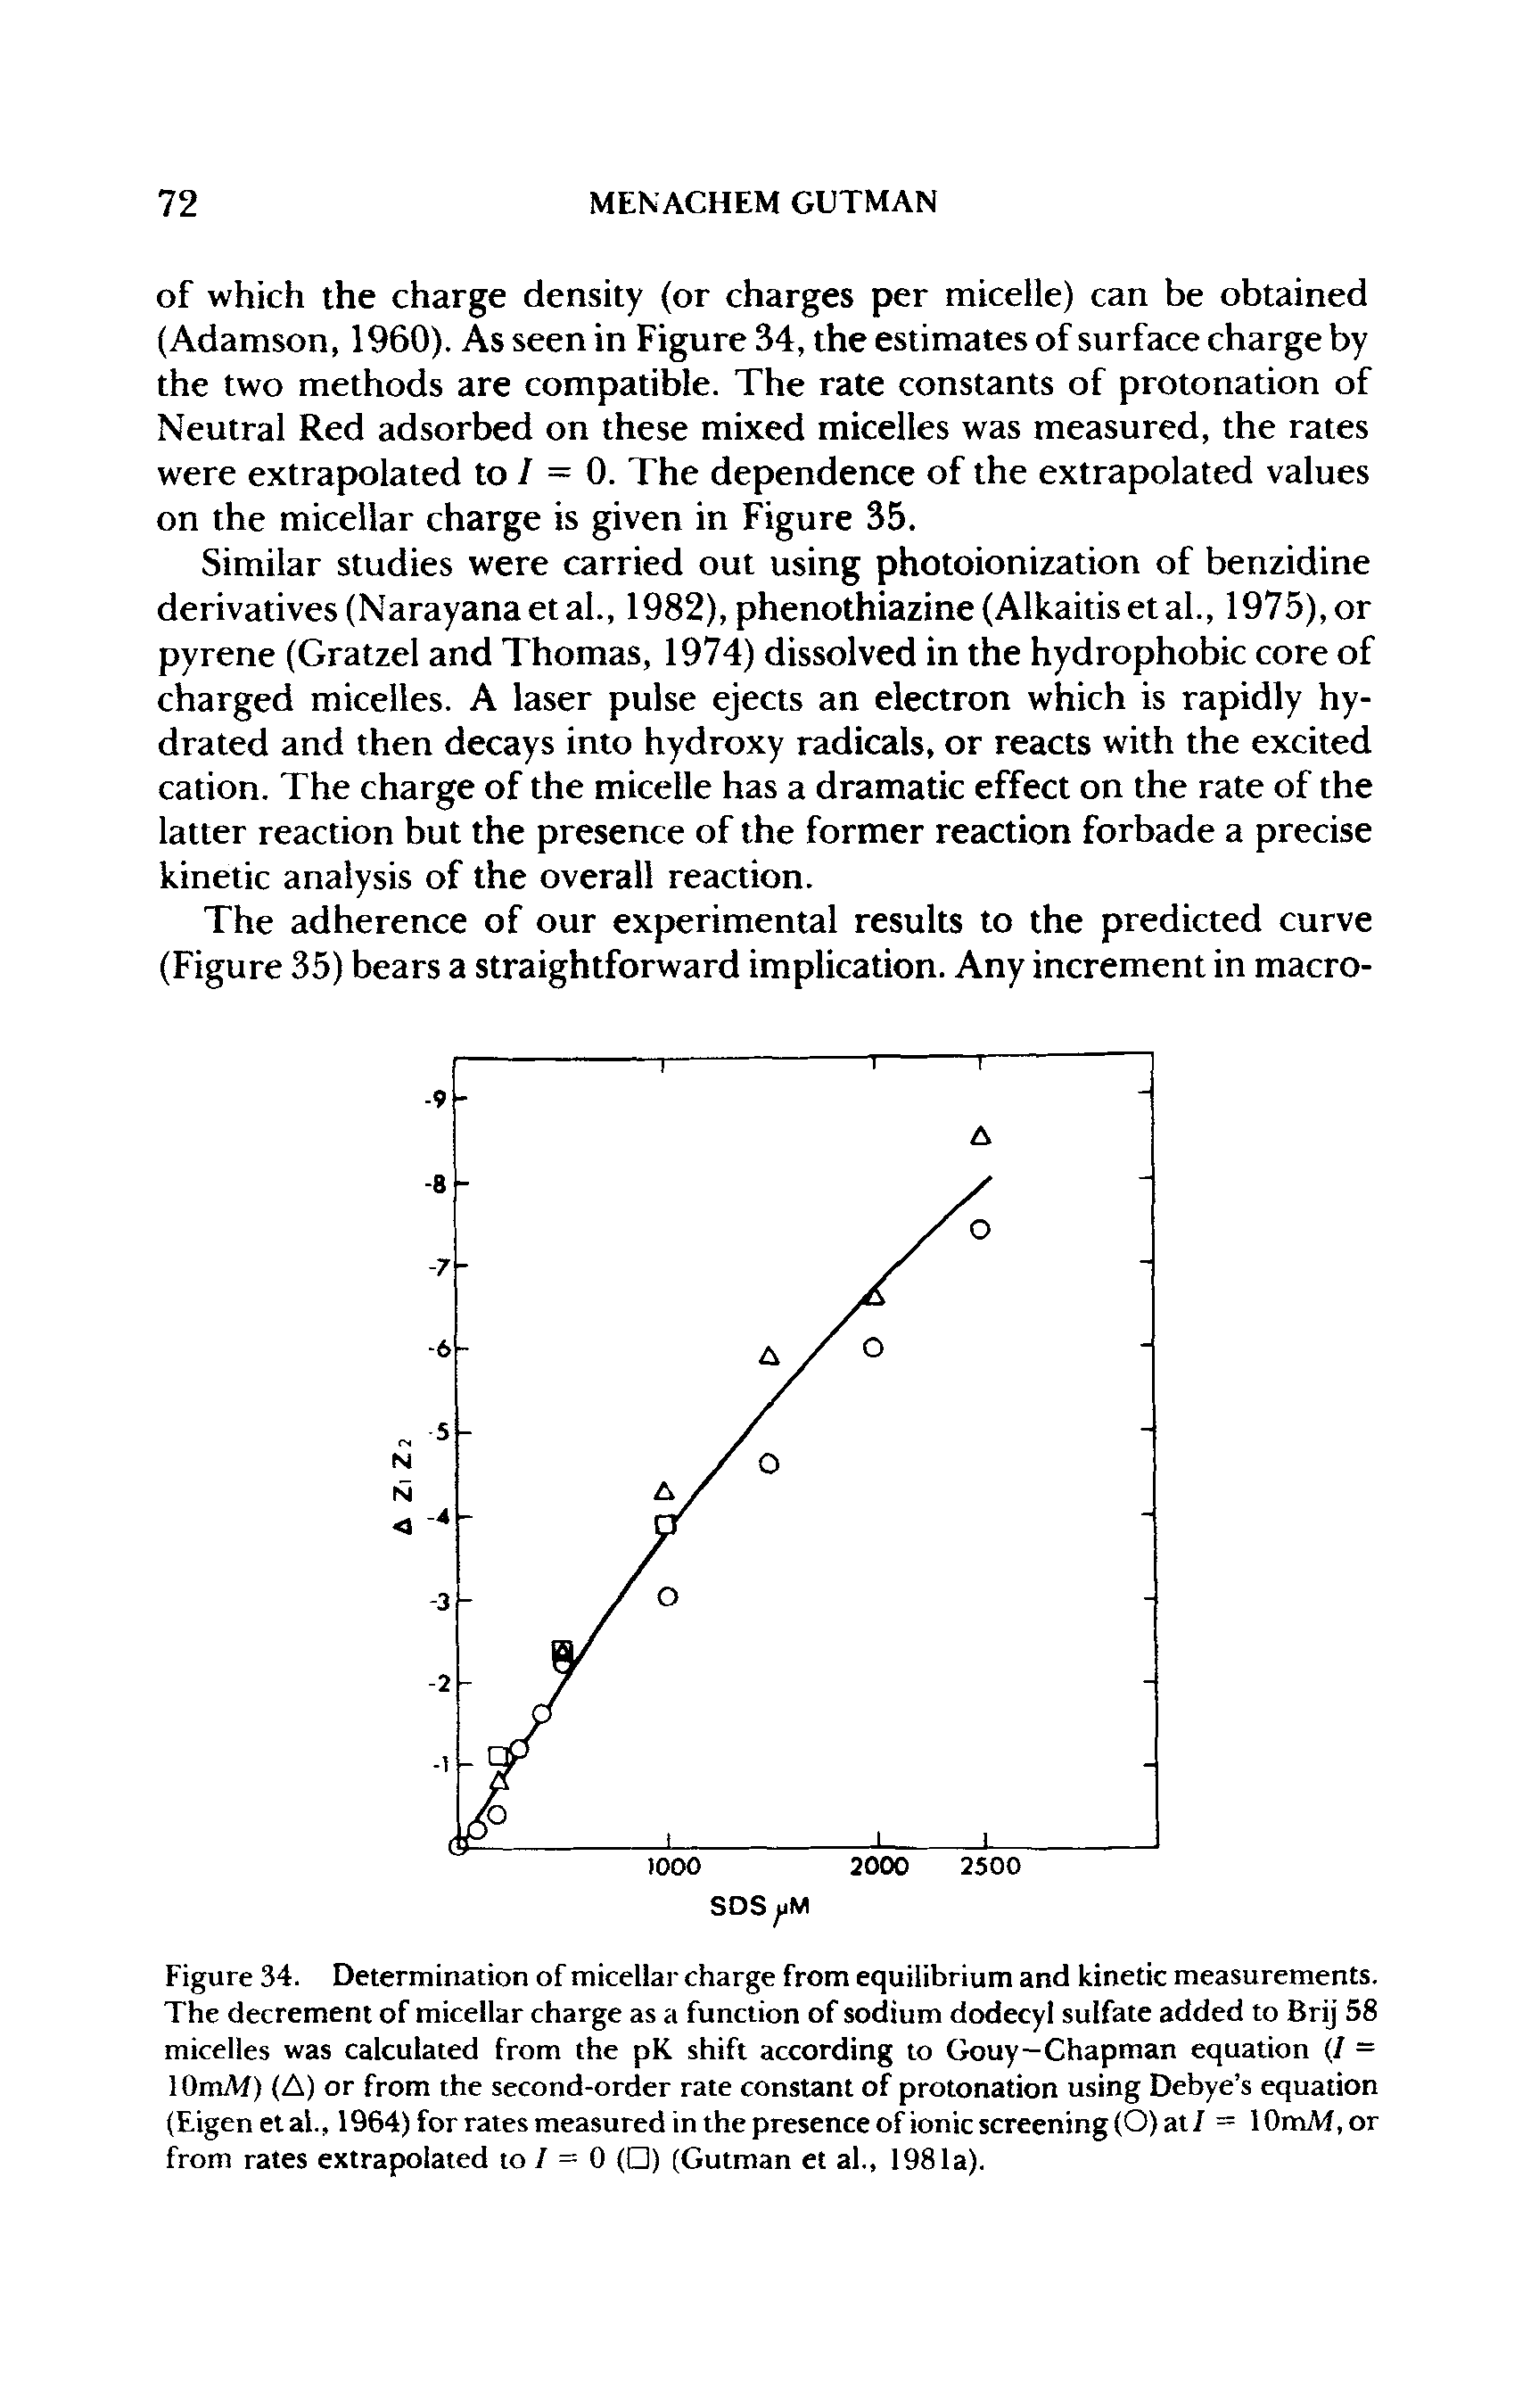 Figure 34. Determination of micellar charge from equilibrium and kinetic measurements. The decrement of micellar charge as a function of sodium dodecyl sulfate added to Brij 58 micelles was calculated from the pK shift according to Gouy-Chapman equation (/ = lOm/W) (A) or from the second-order rate constant of protonation using Debye s equation (Eigen etal., 1964) for rates measured in the presence of ionic screening (O) at/ = 10mM,or from rates extrapolated to / = 0 ( ) (Gutman et al., 1981a).